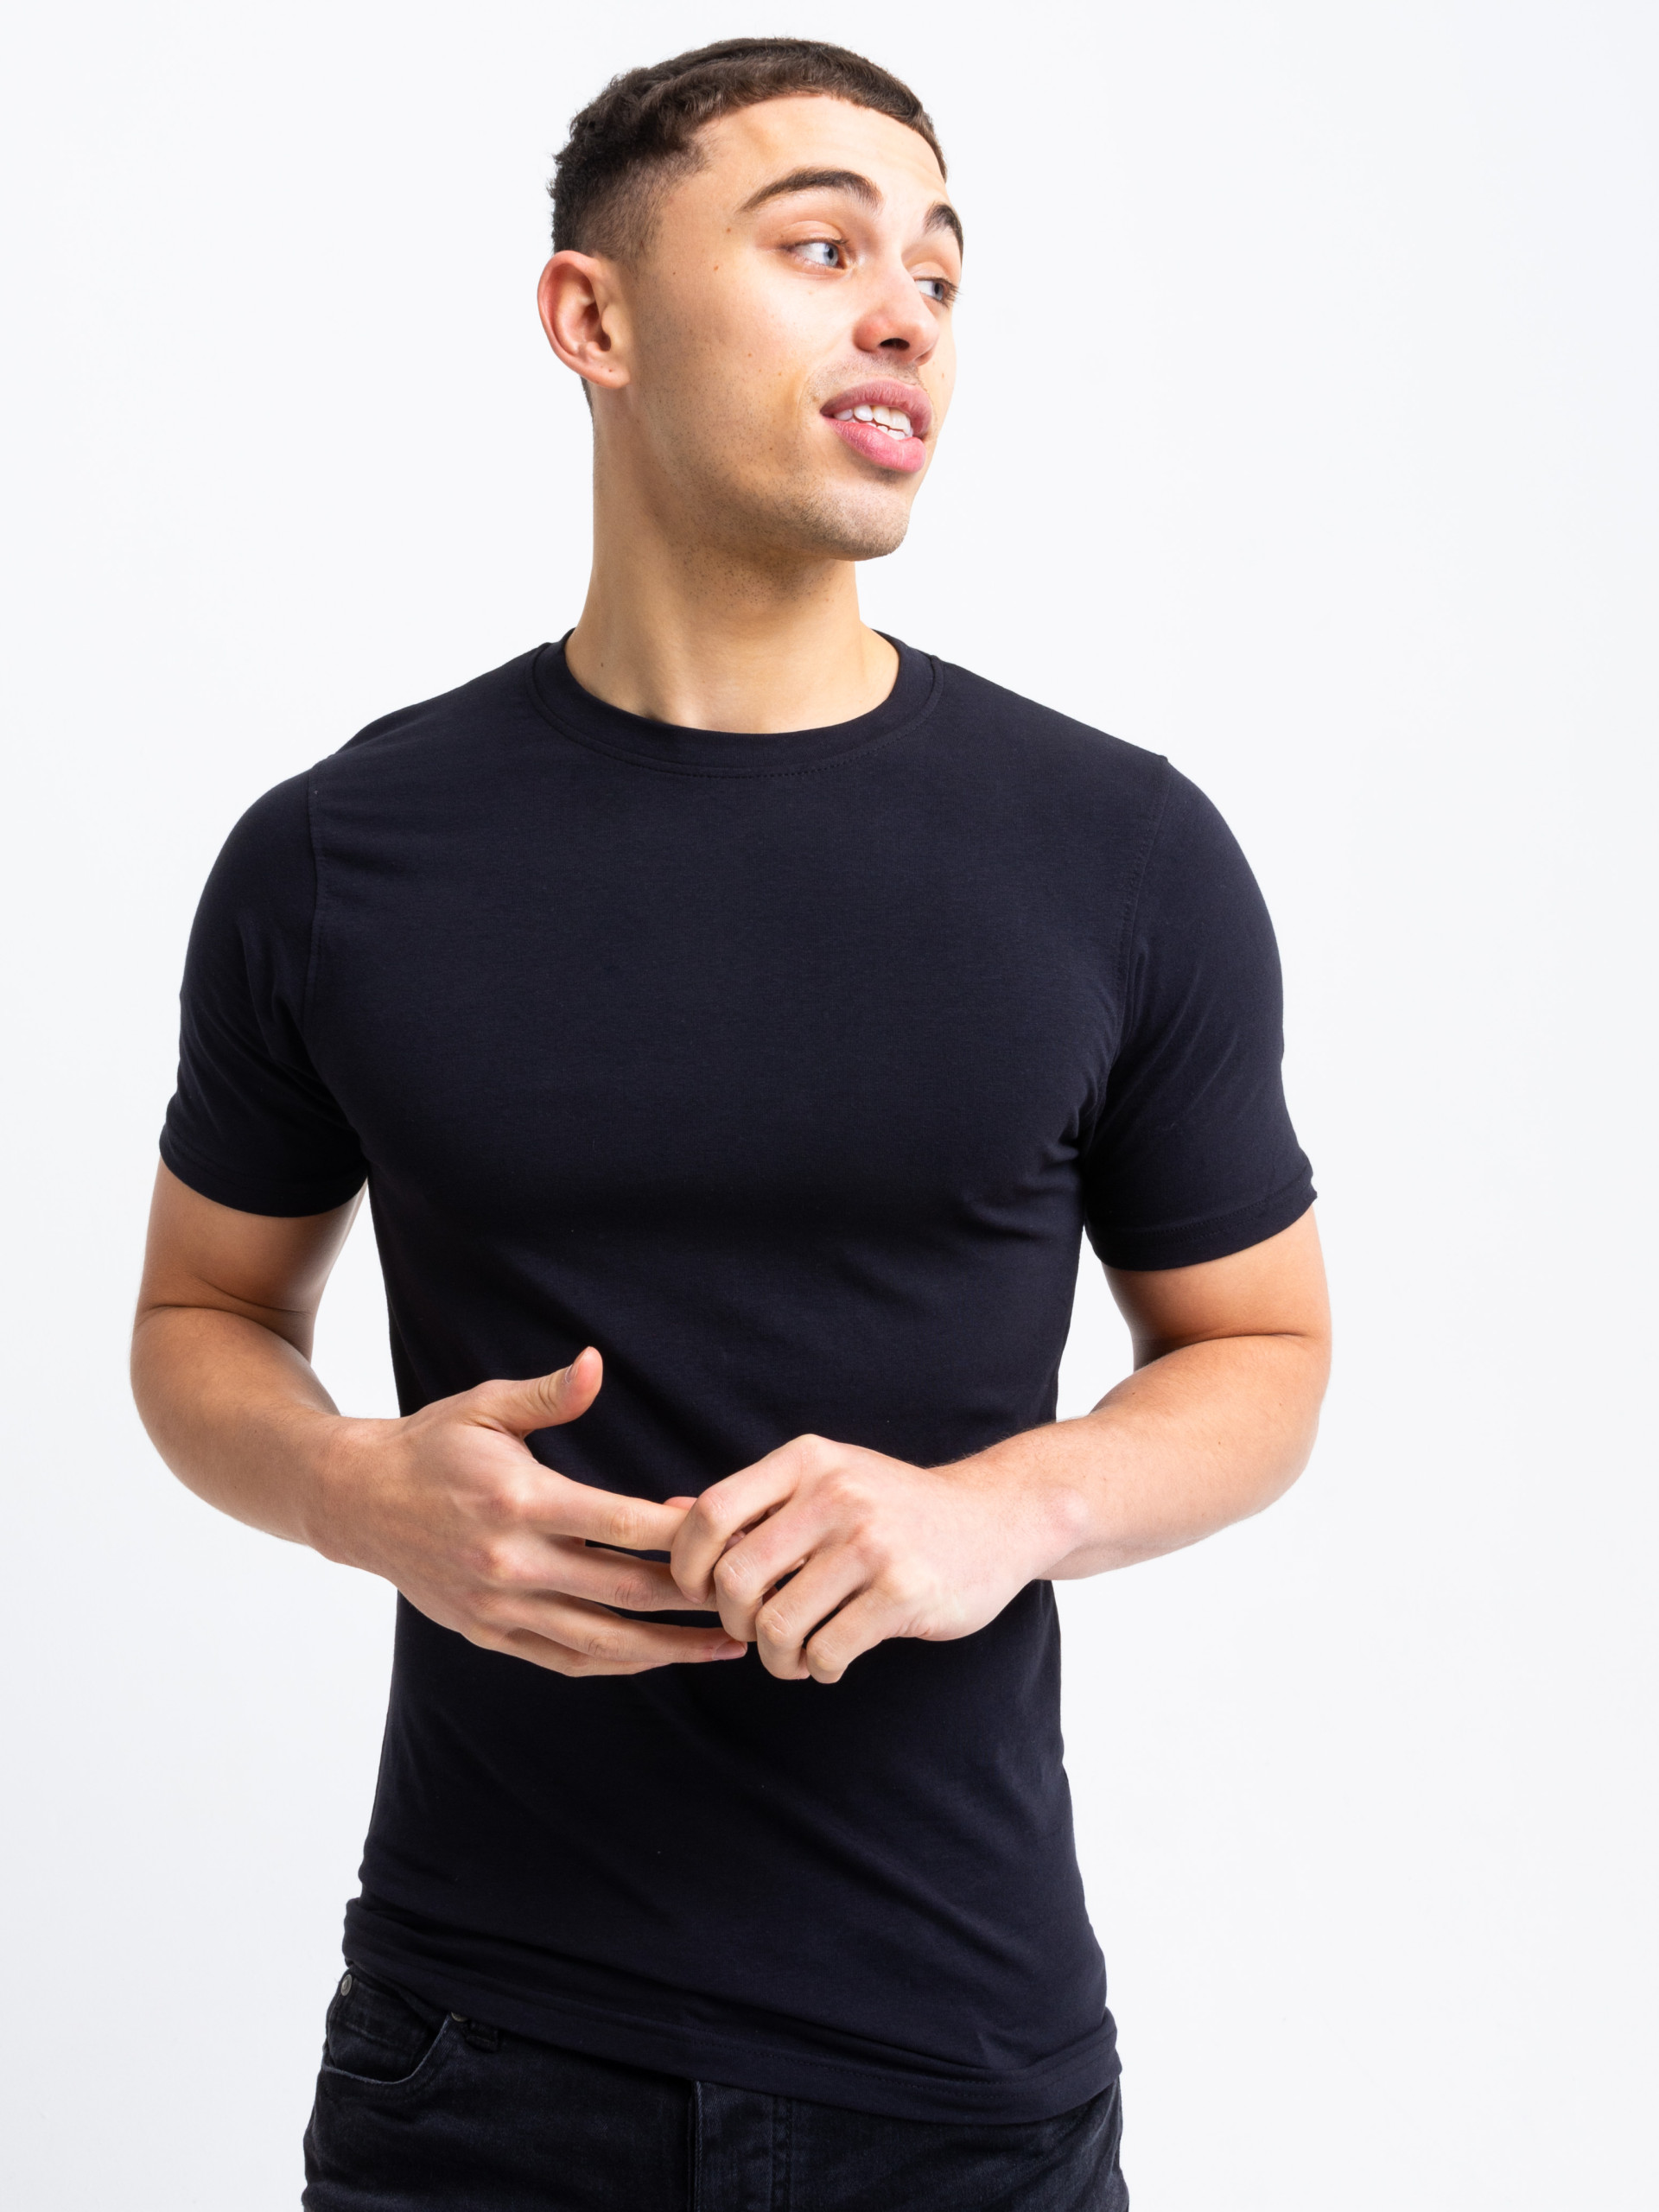 Premium Muscle Fit T-Shirt in Black, Men's Clothing & Fashion